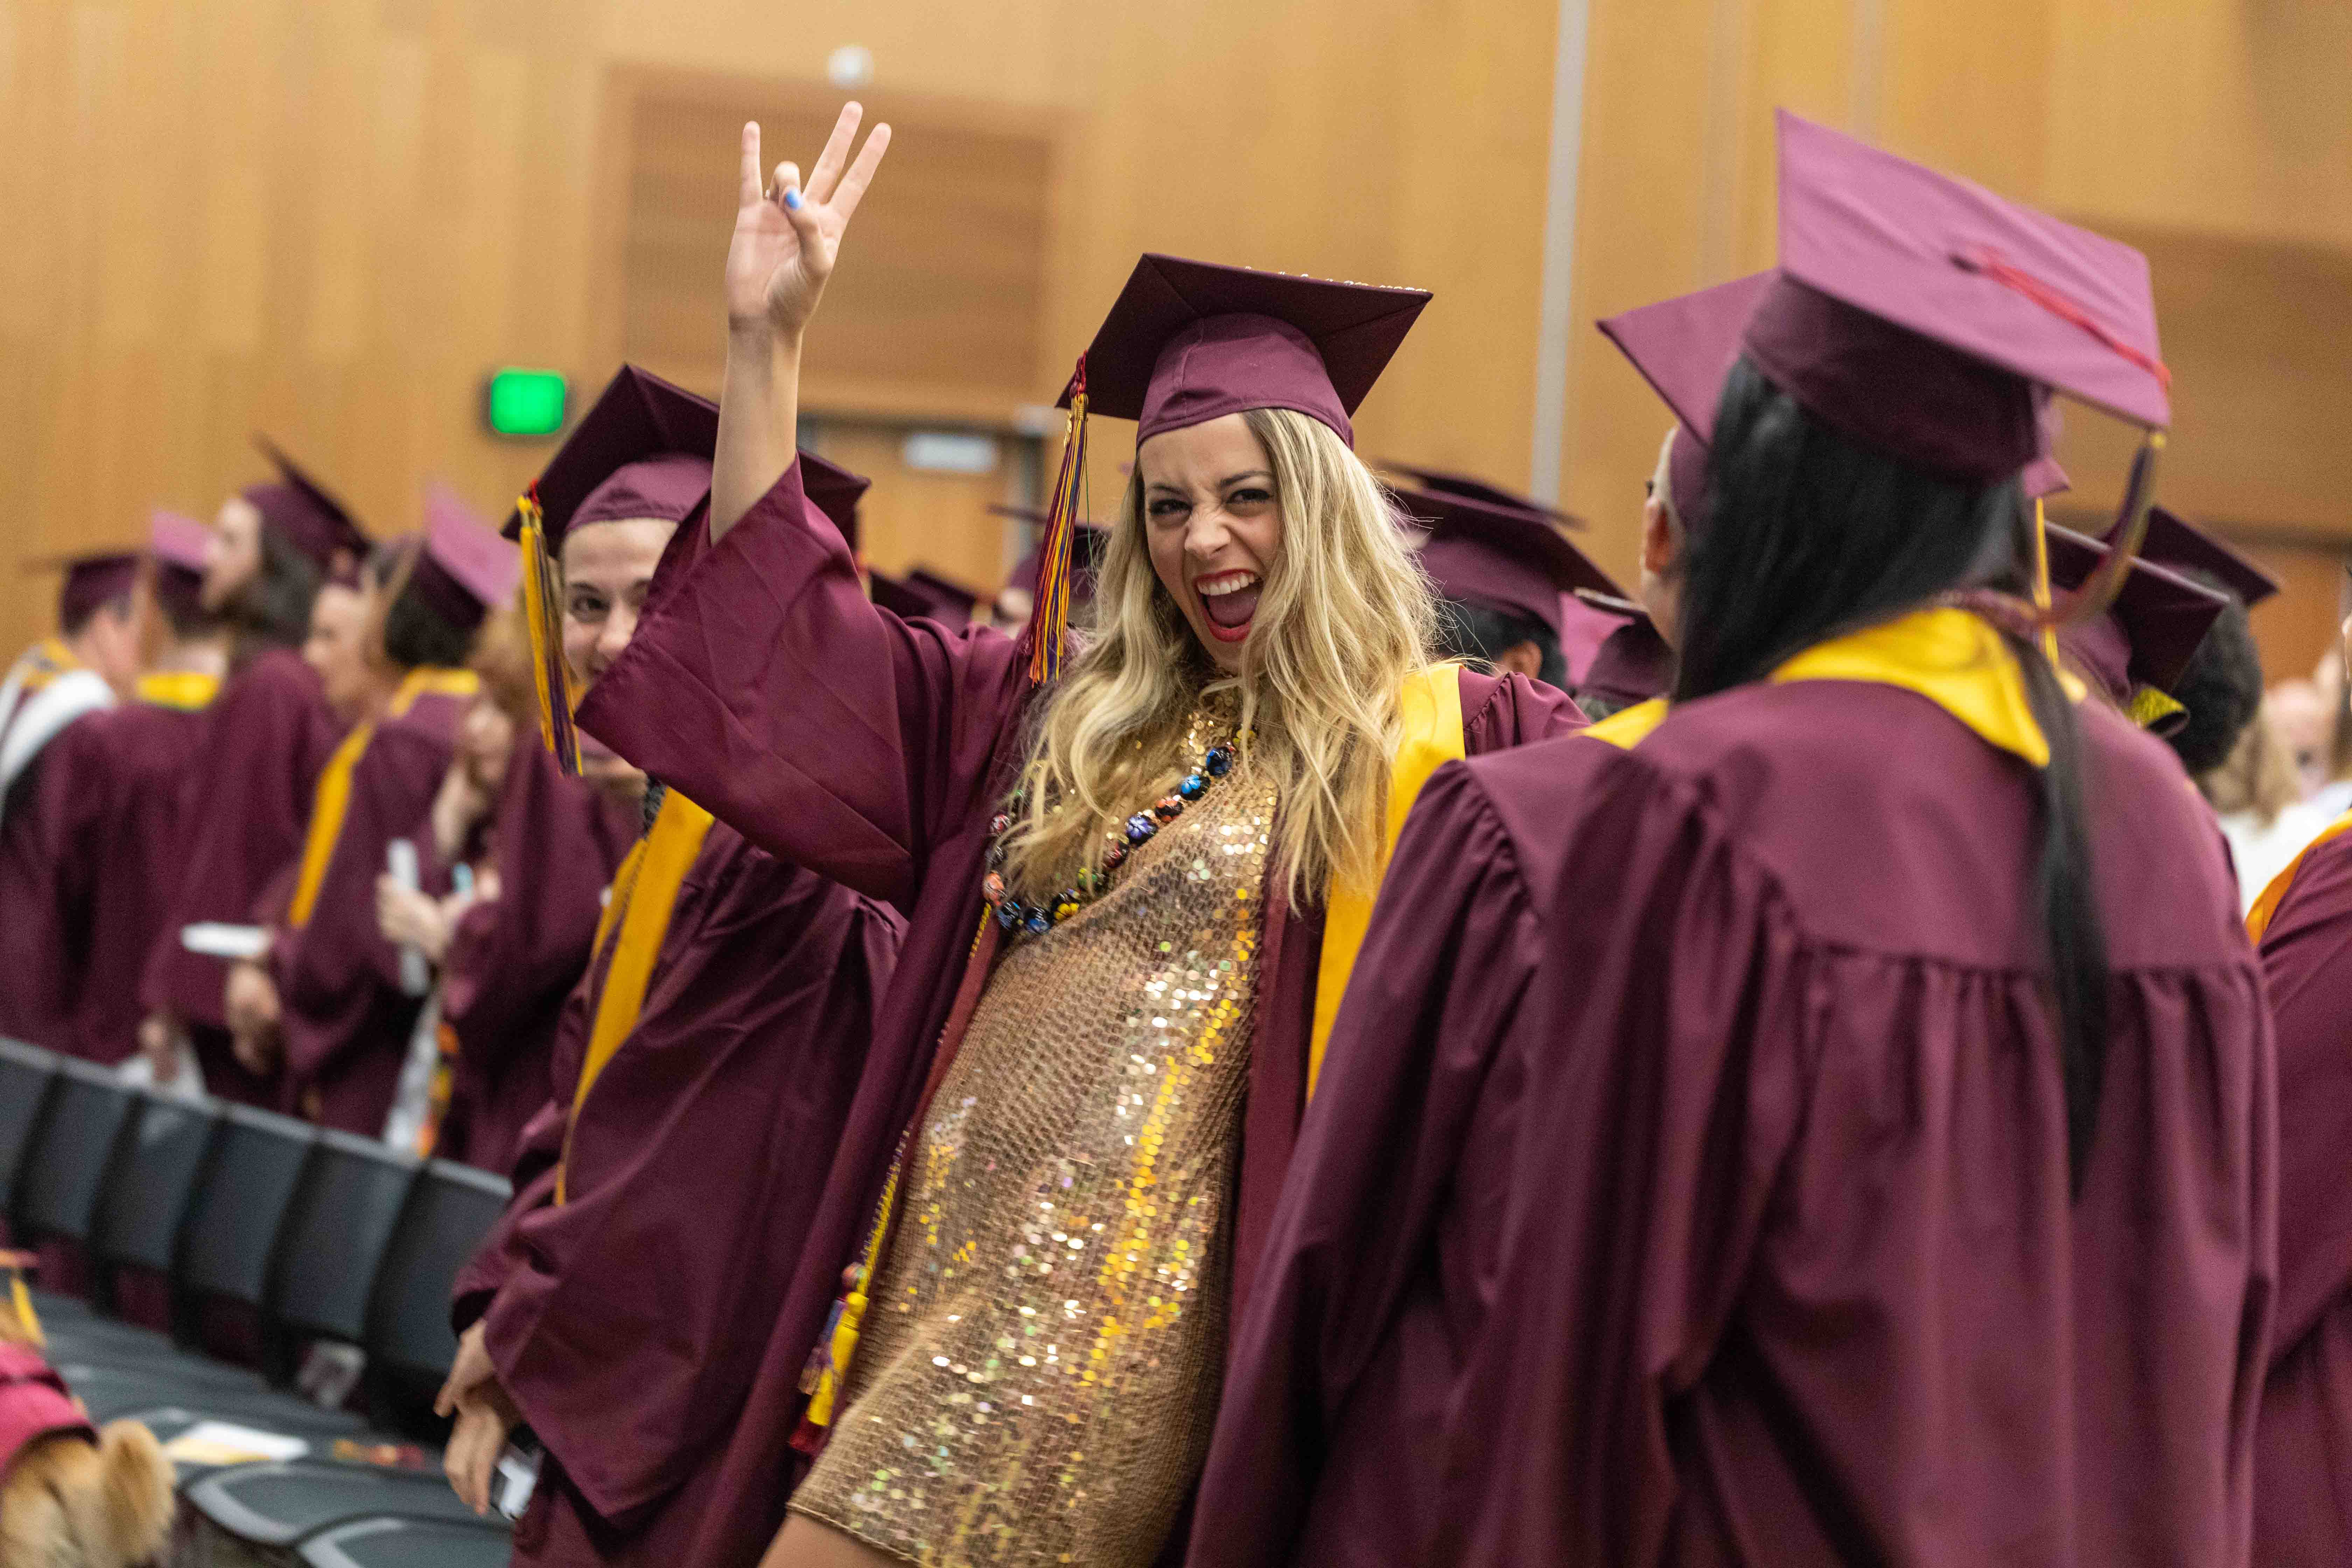 ASU student in a gold sequined dress gives a forks up symbol at the Rainbow LGBTQ graduation convocation at ASU's Tempe campus in the Student Pavilion